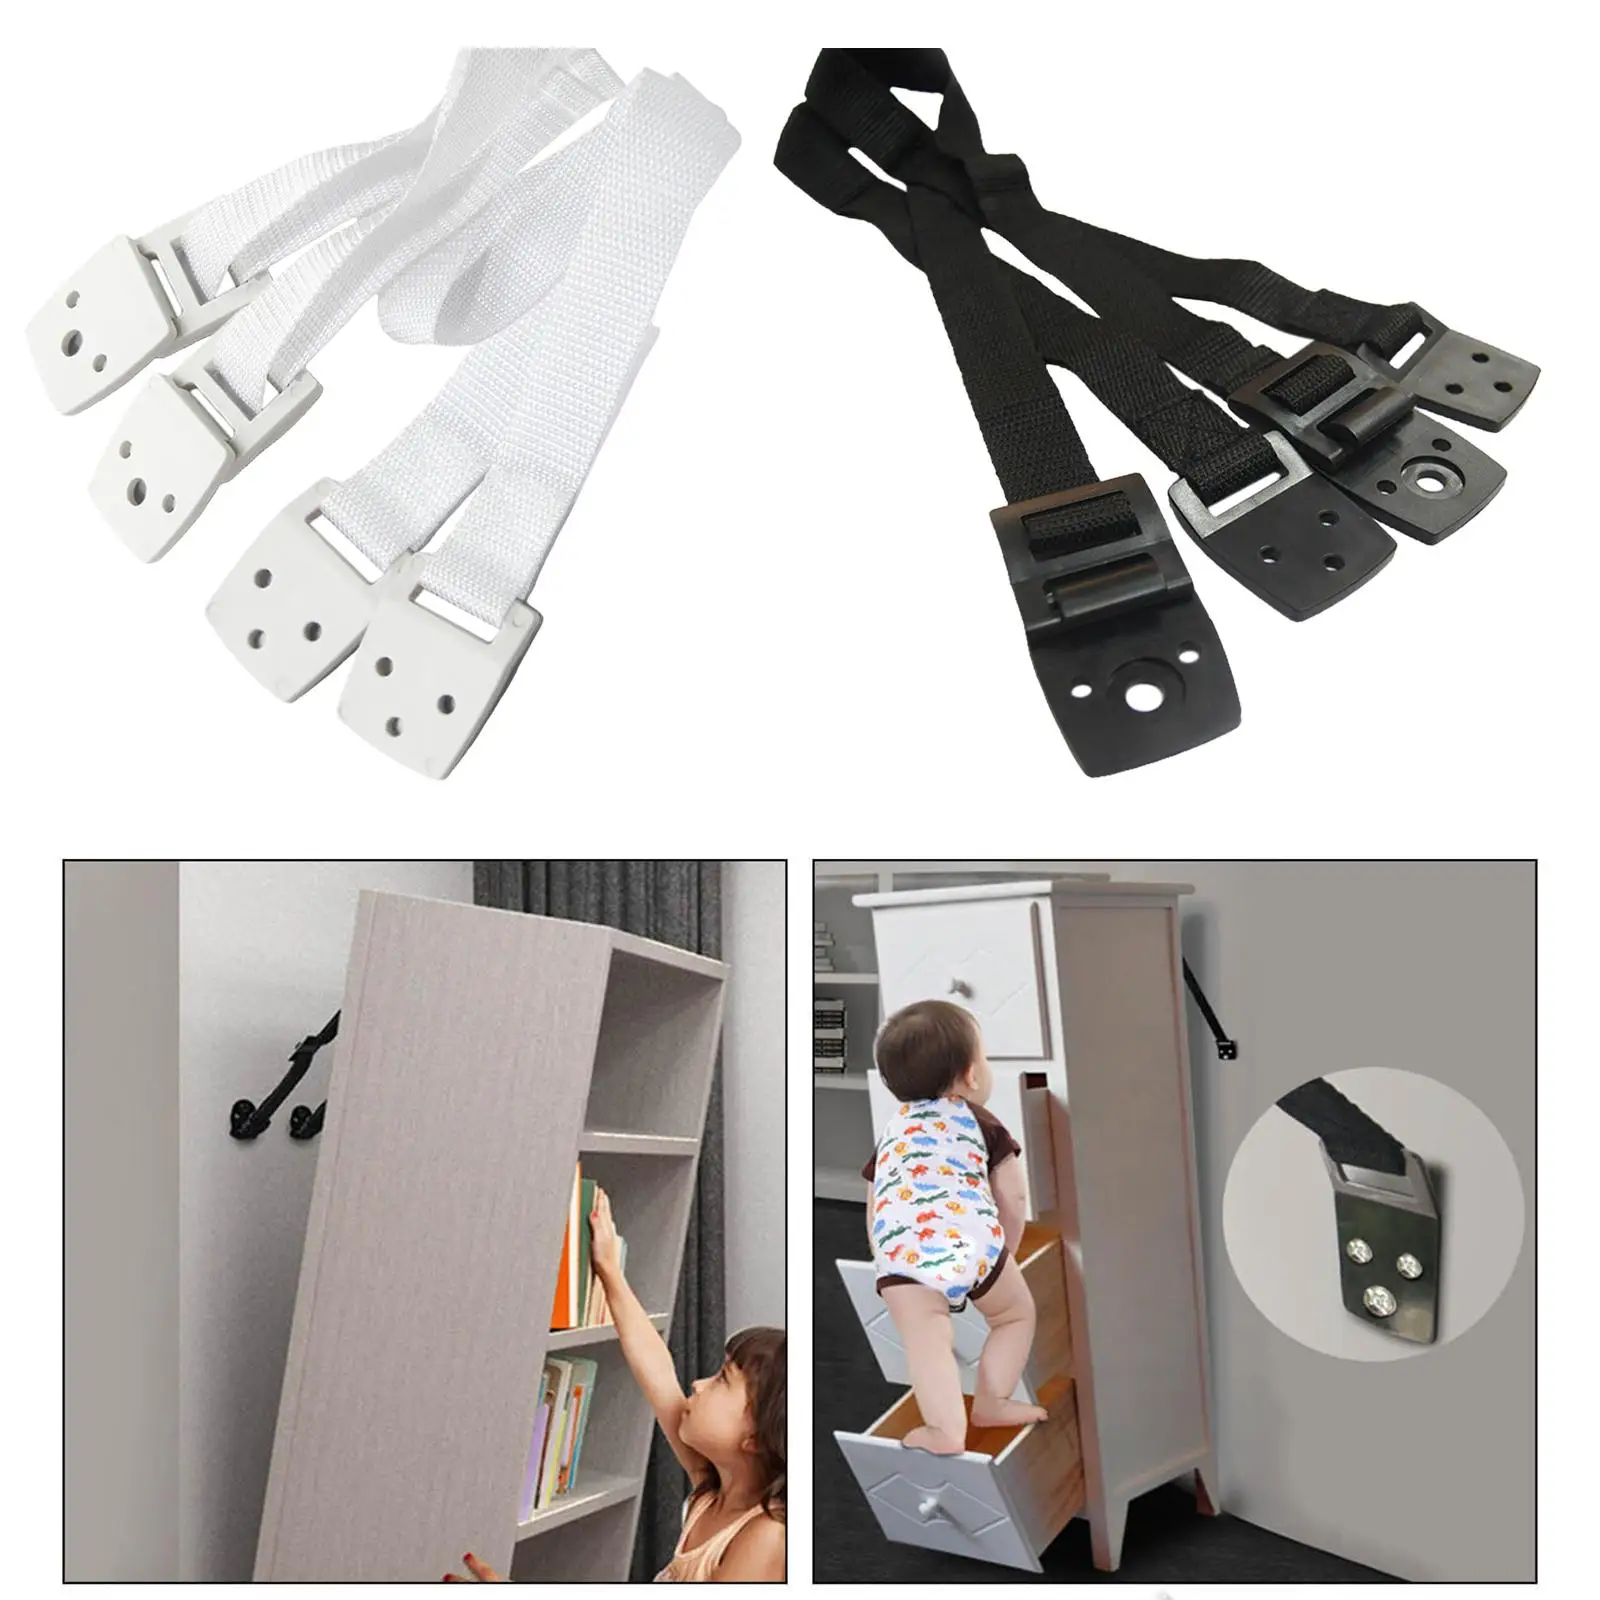 TV Anti Tip Straps Adjustable  Non Tipping Safety Strap Cable for Dresser Shelves Kids Proofing Protection Child